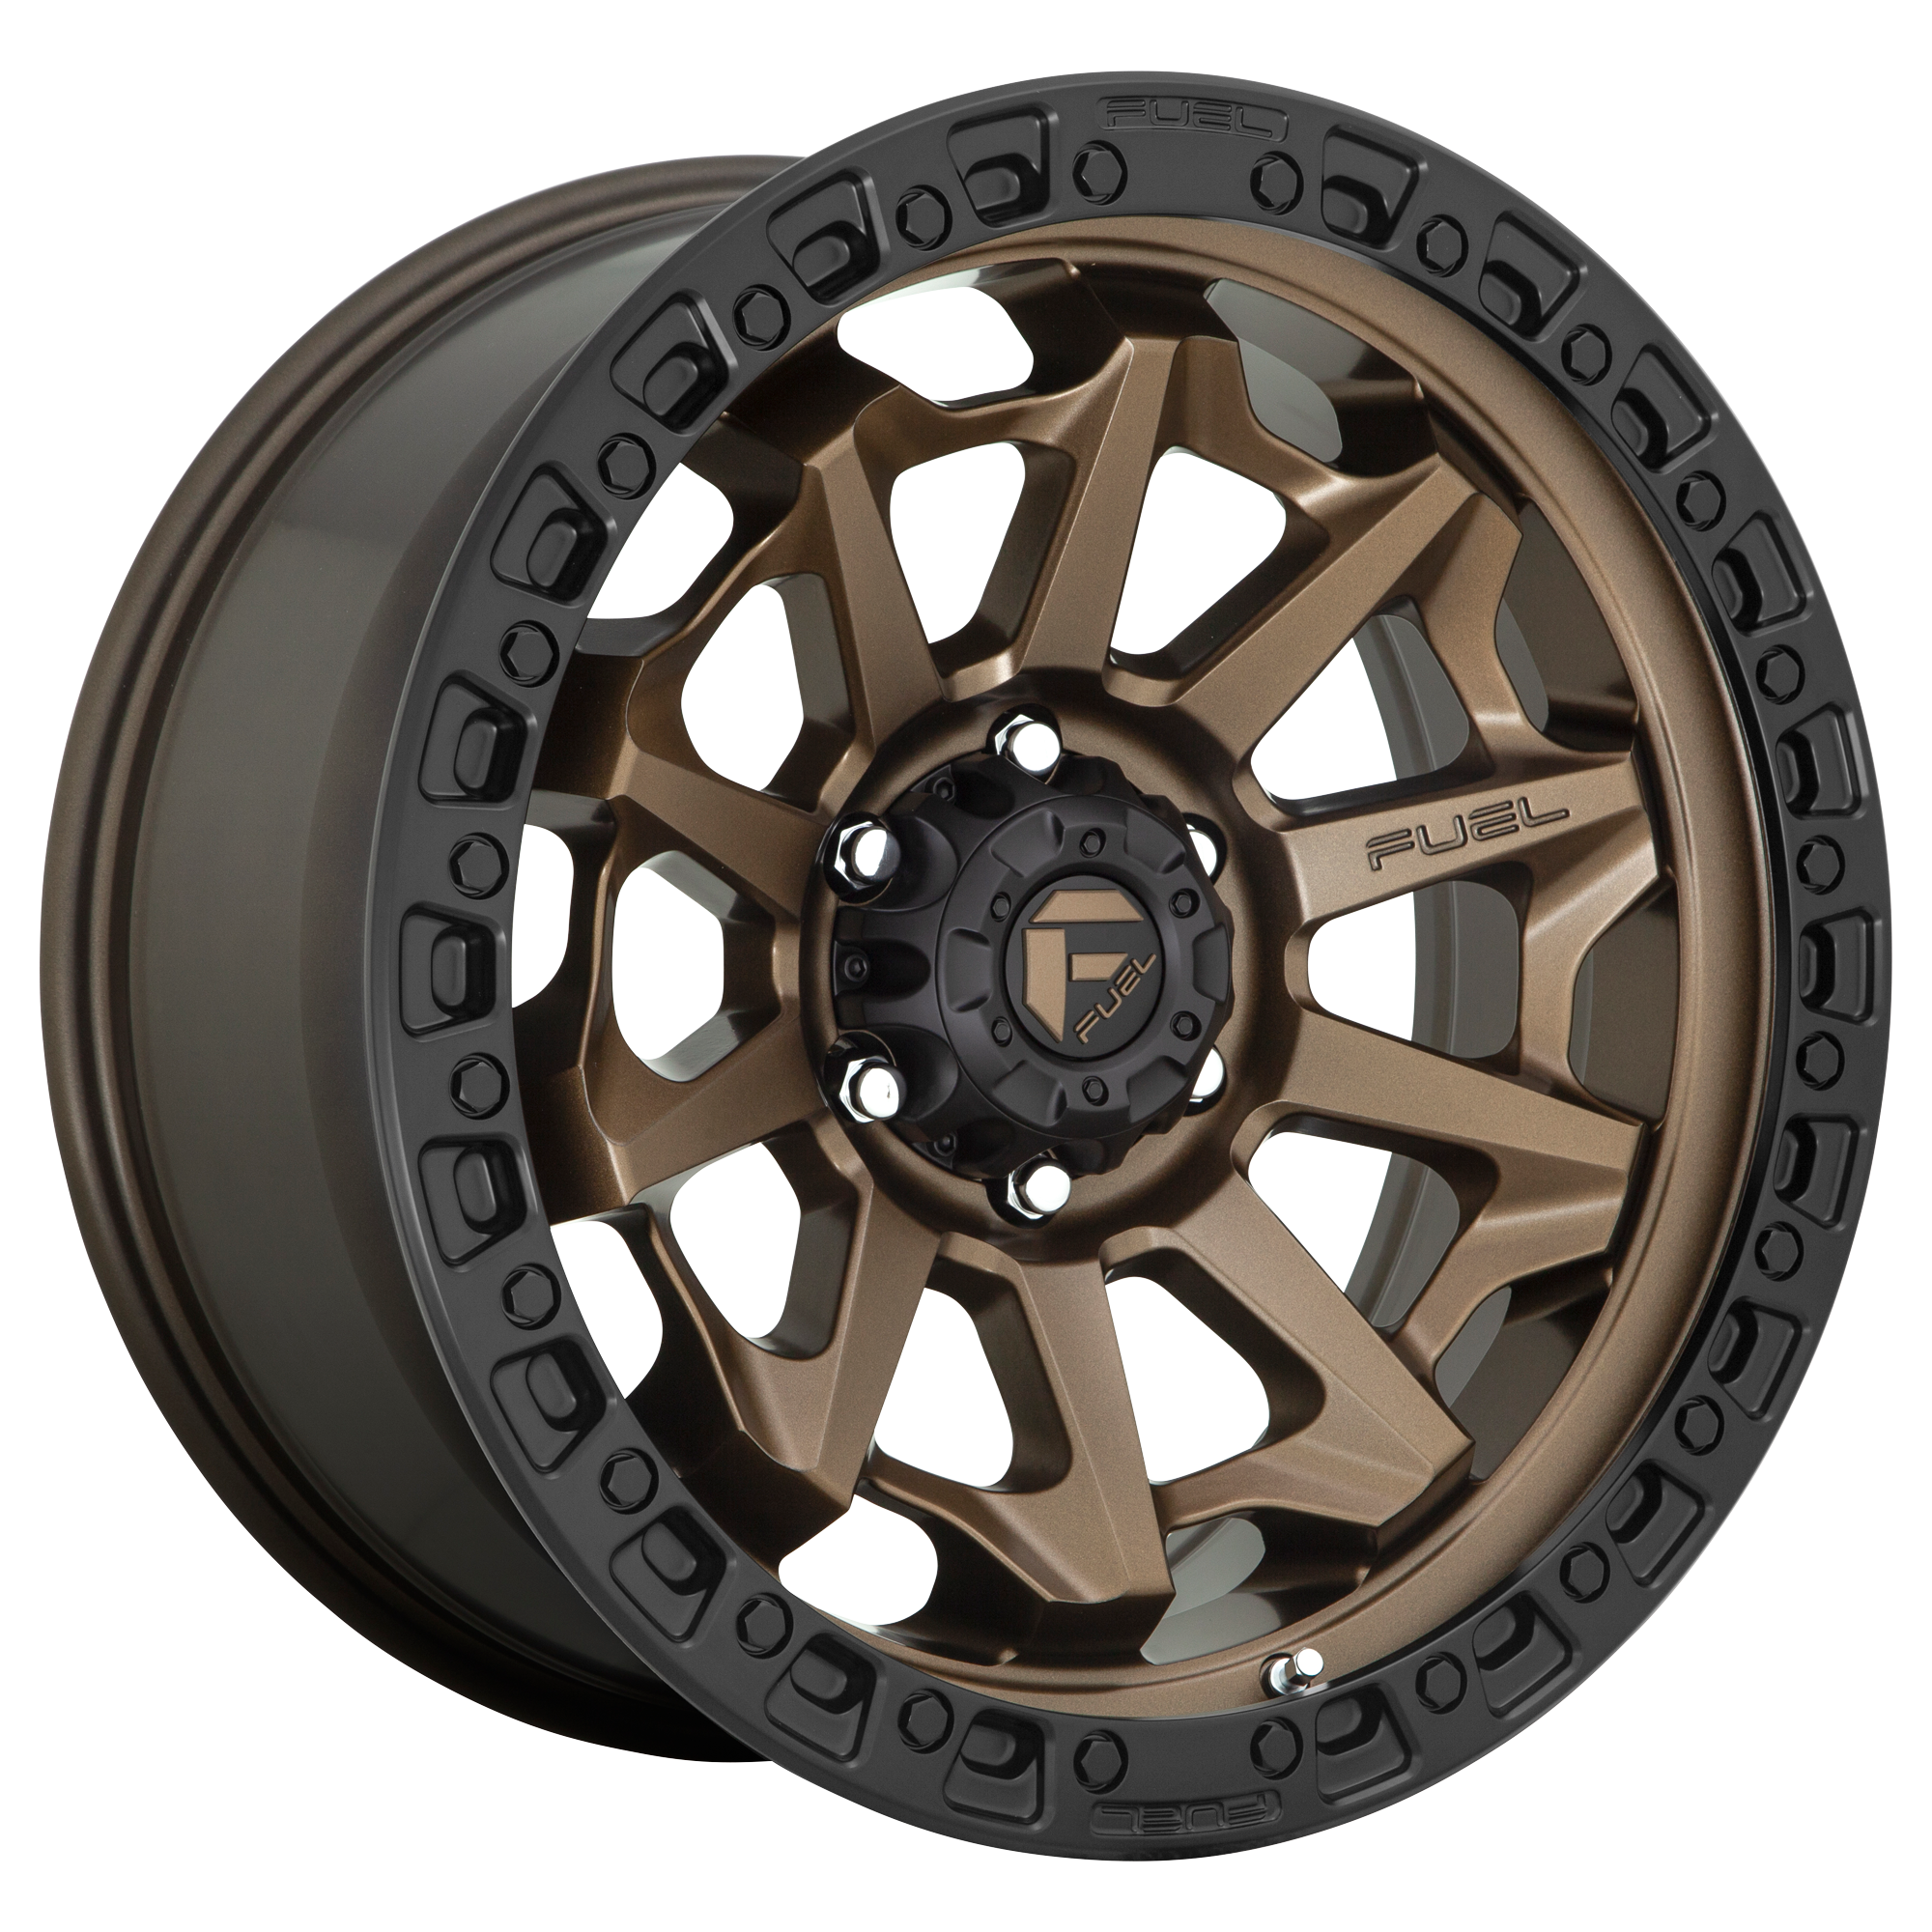 COVERT 18x9 5x127.00 MATTE BRONZE BLACK BEAD RING (-12 mm) - Tires and Engine Performance